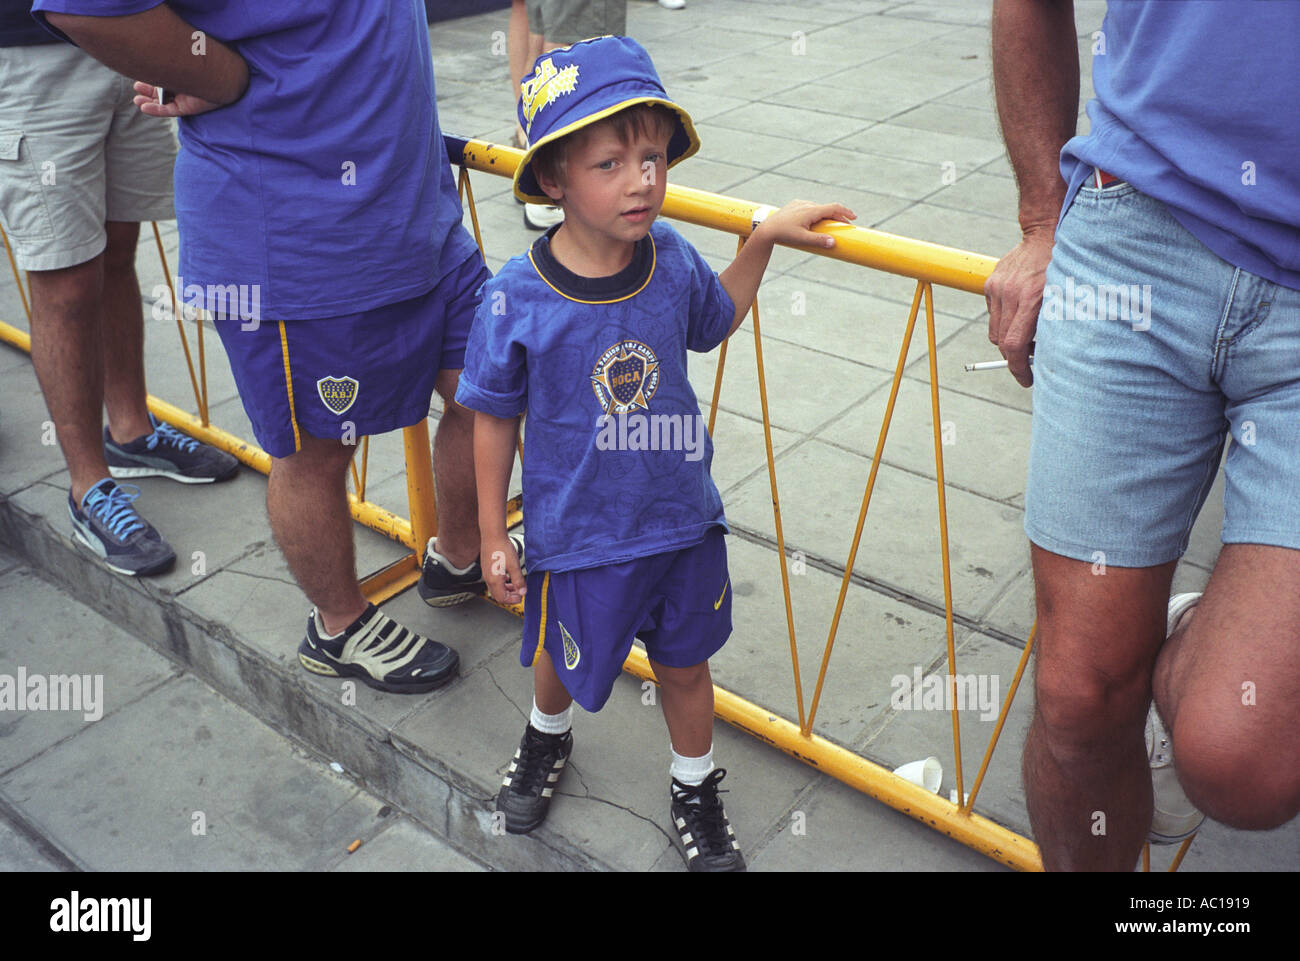 Young football fan arrives at Boca Junior team stadium Buenos Aires Argentina South America 2000s 2002 HOMER SYKES Stock Photo